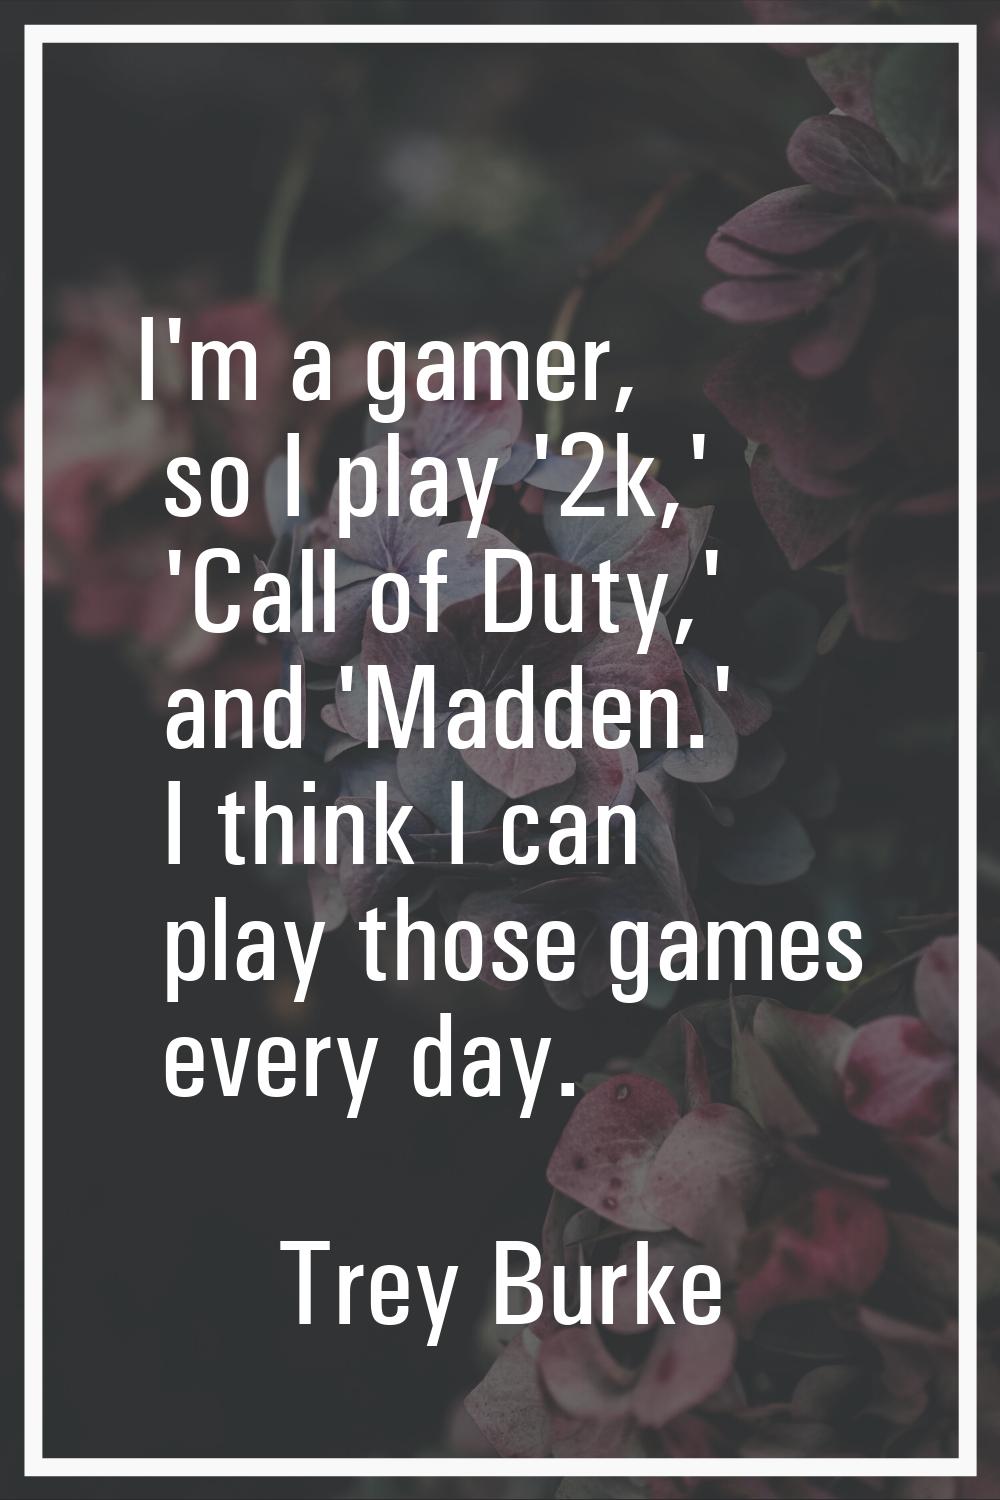 I'm a gamer, so I play '2k,' 'Call of Duty,' and 'Madden.' I think I can play those games every day